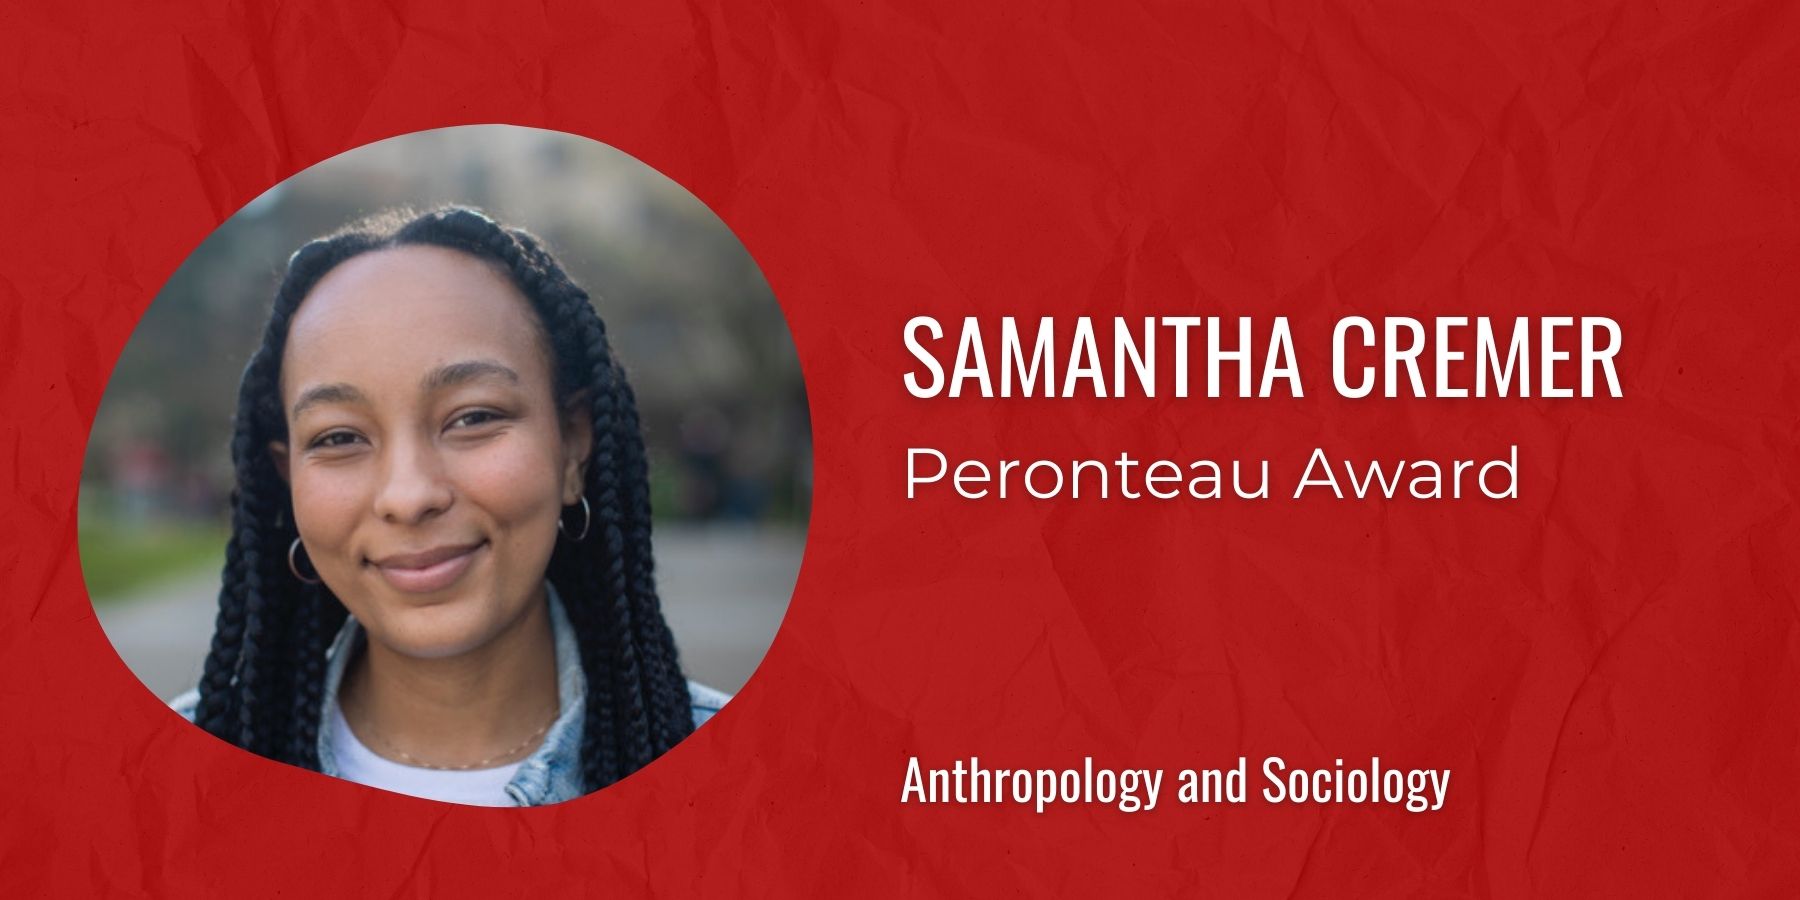 Image of Samantha Cremer with text: Peronteau Award, Anthropology and Sociology
